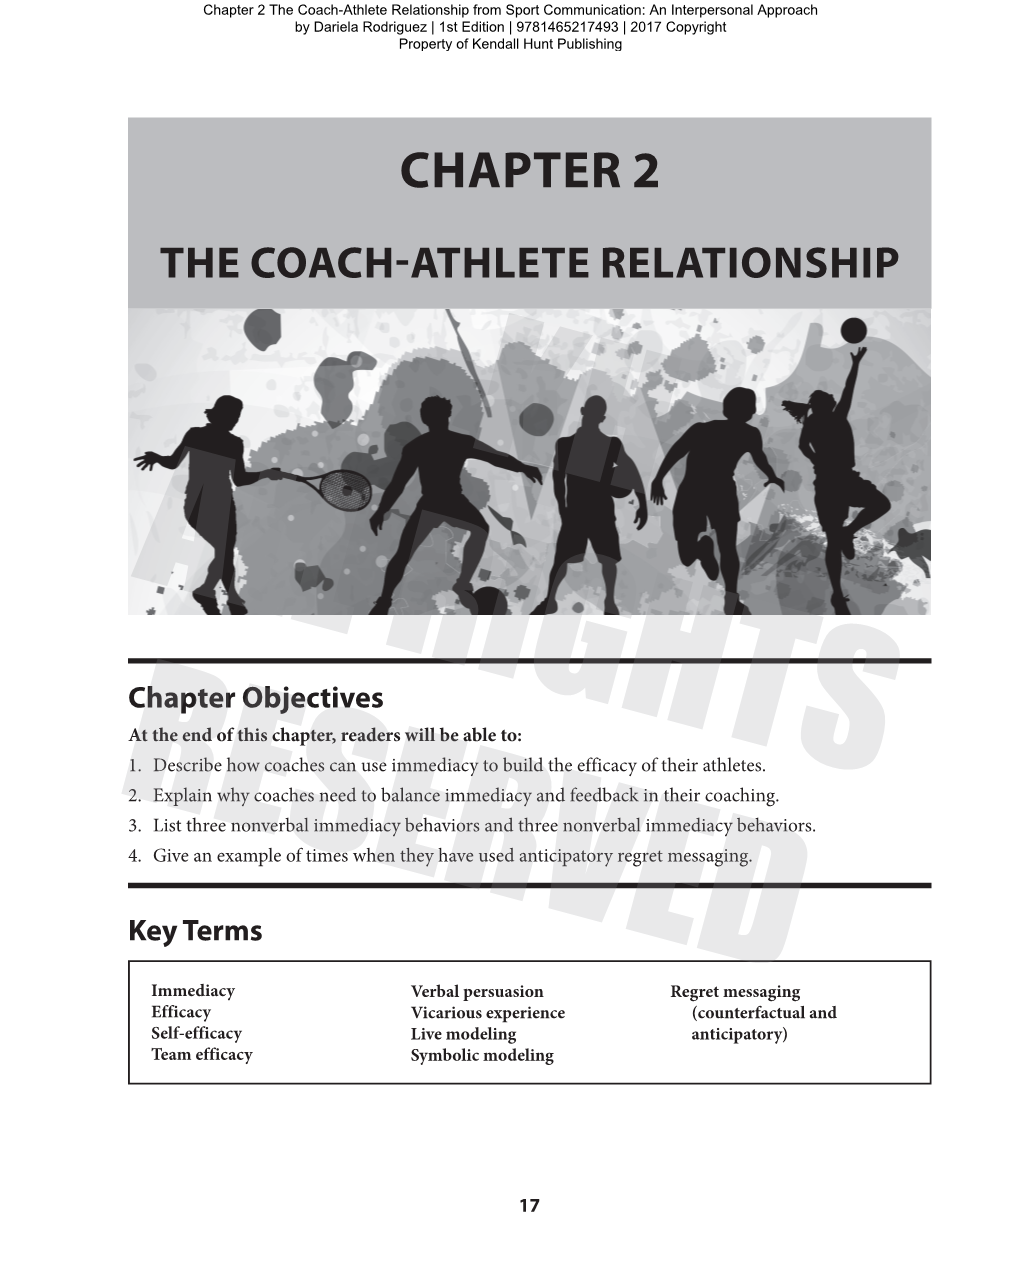 Chapter 2 the Coach-Athlete Relationship